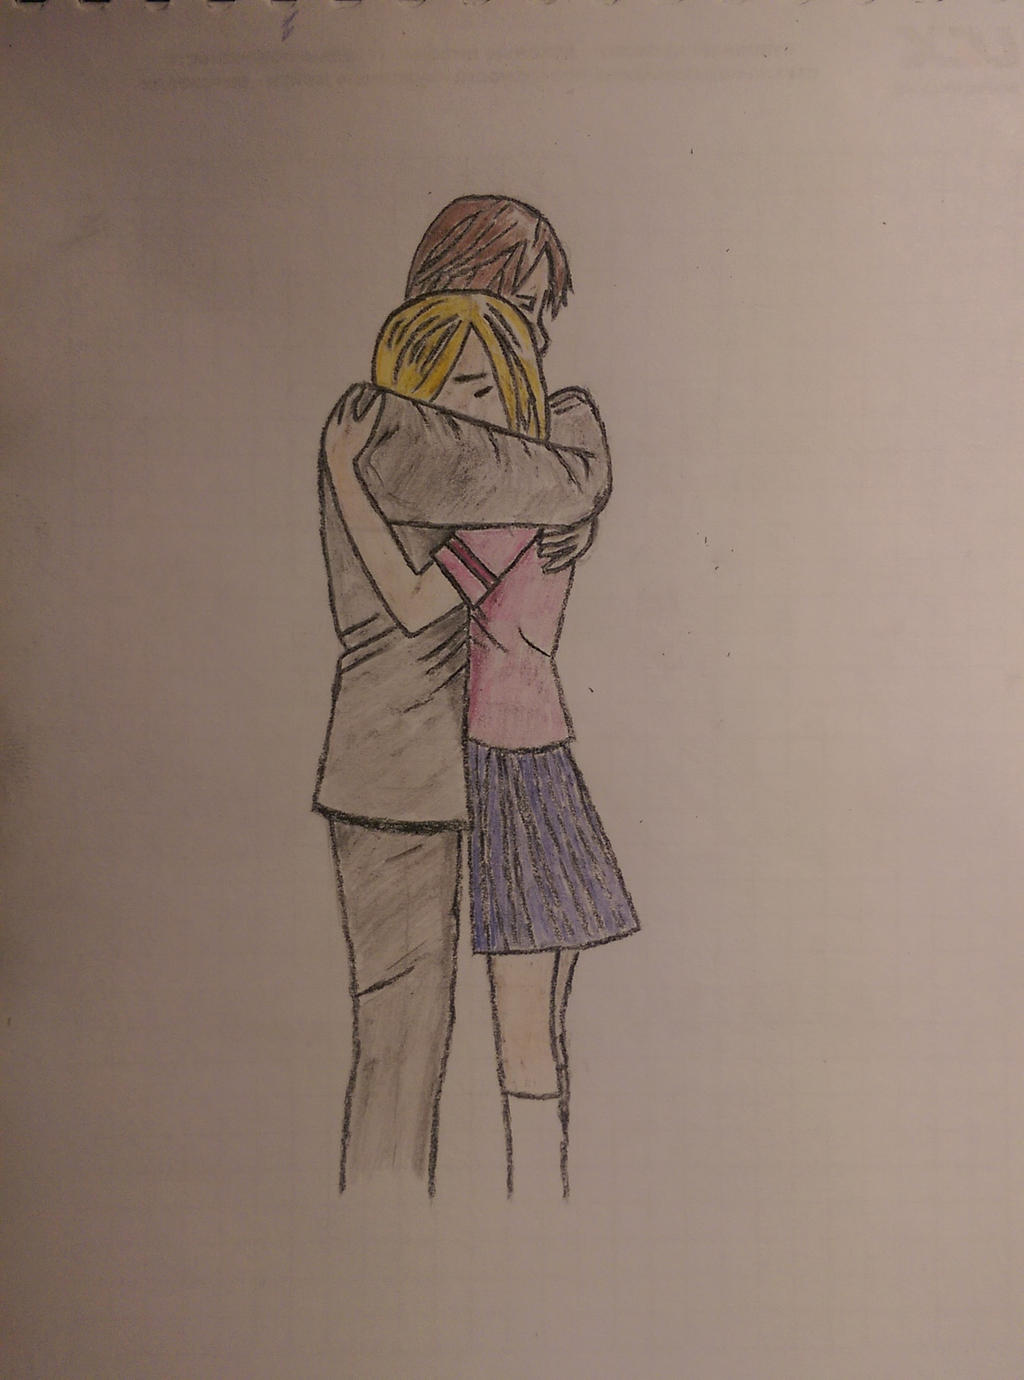 Anime boy and girl hugging by kaisft on DeviantArt